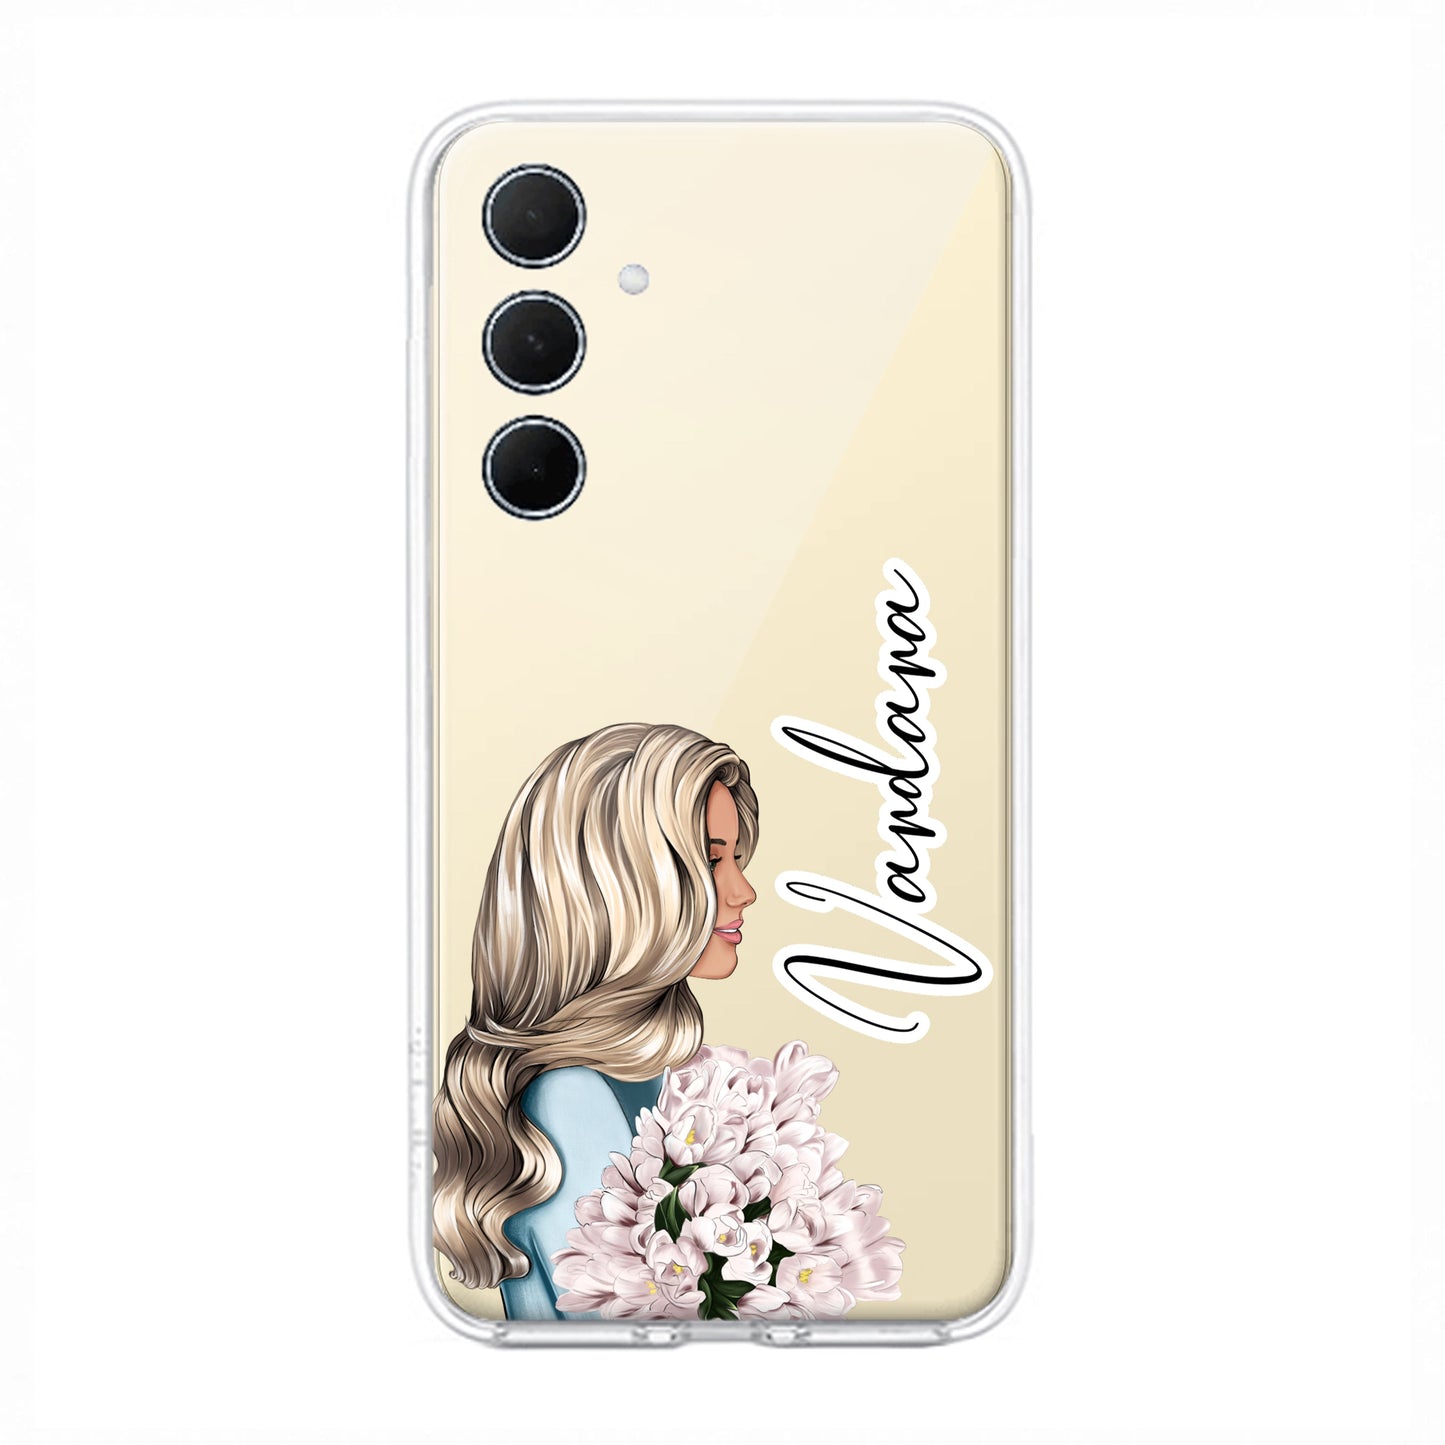 Stylish Girl Customize Transparent Silicon Case For Samsung